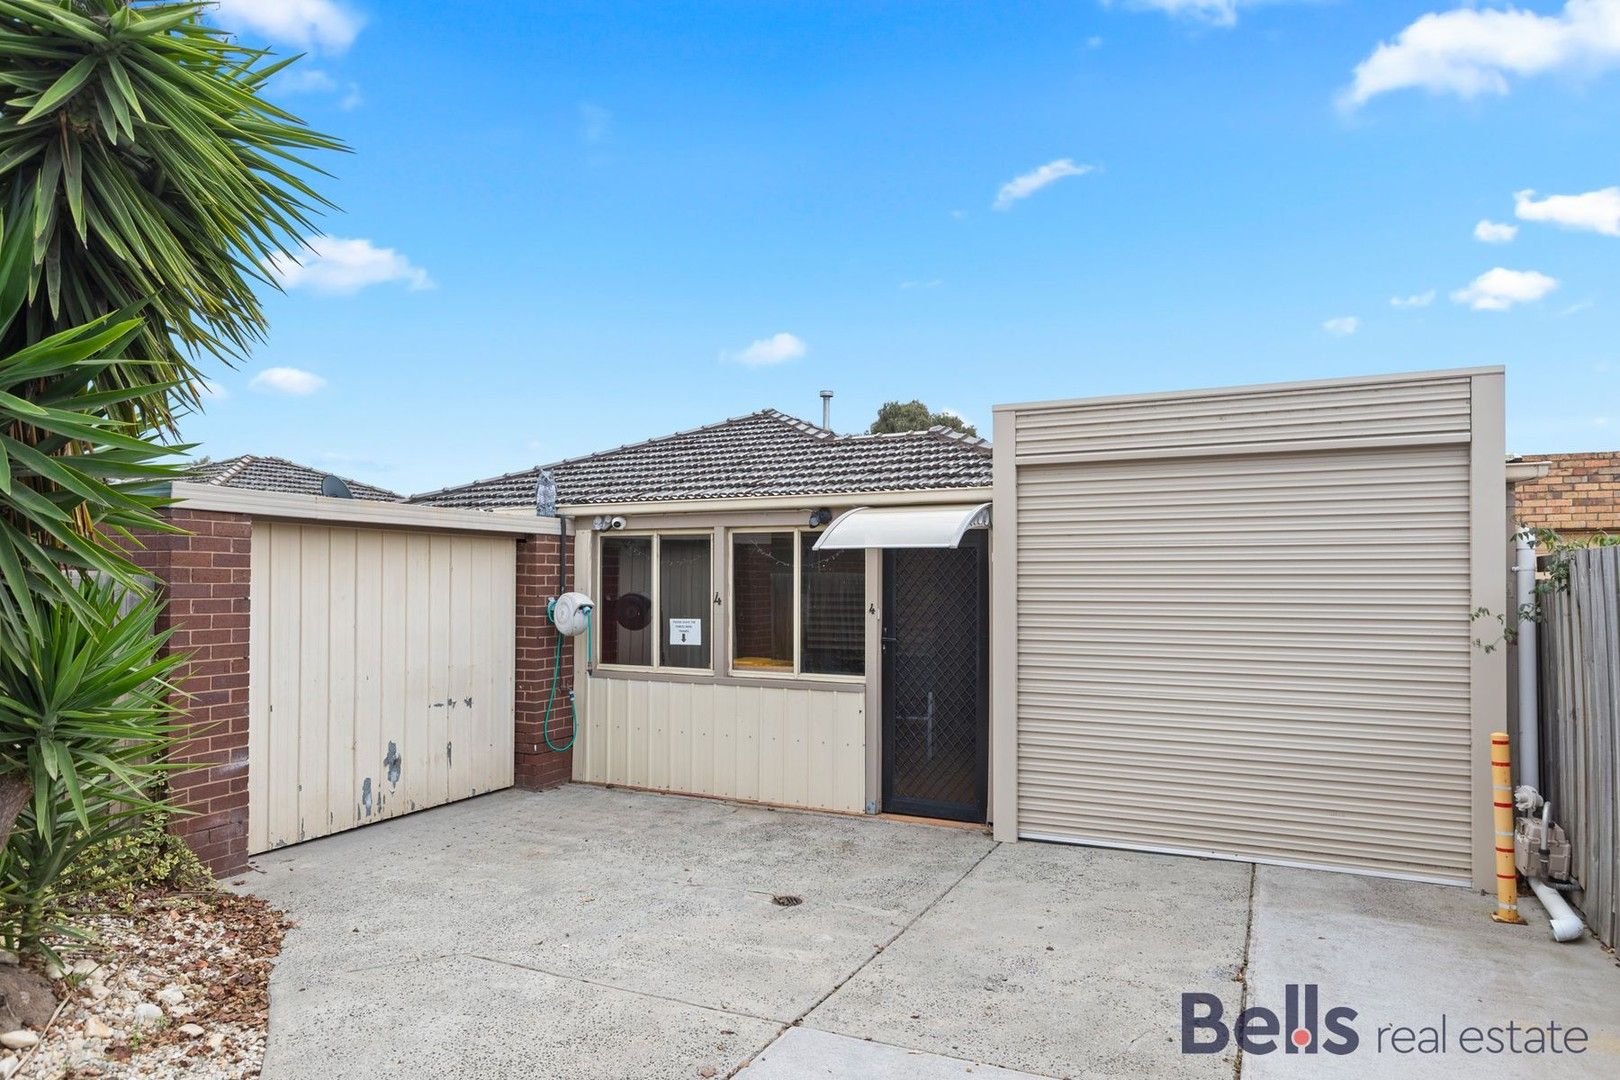 2 bedrooms Apartment / Unit / Flat in 4/20 Montasell Avenue DEER PARK VIC, 3023